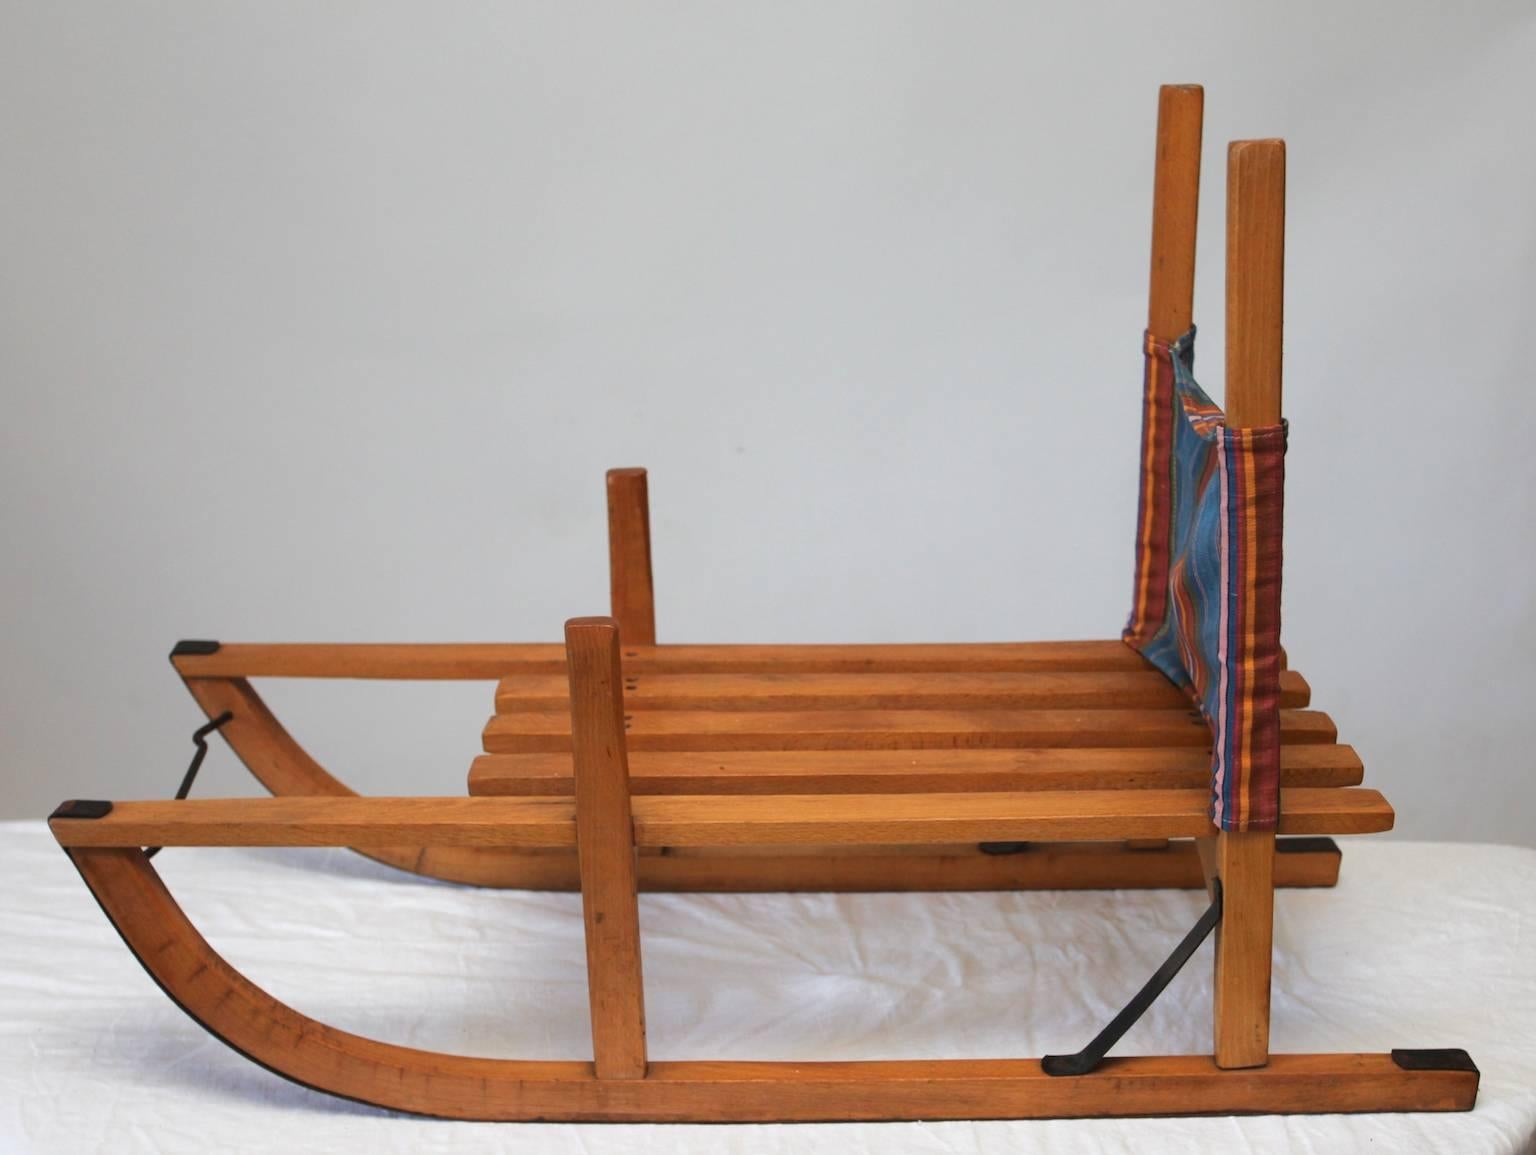 This is a very fine high quality and traditional childrens wooden Sledge from Sweden. The fabric is removable.
Probably made somewhere between 1910-1950s, Steel Reinforced skids and struts. It is unique since most today are made of plastic and